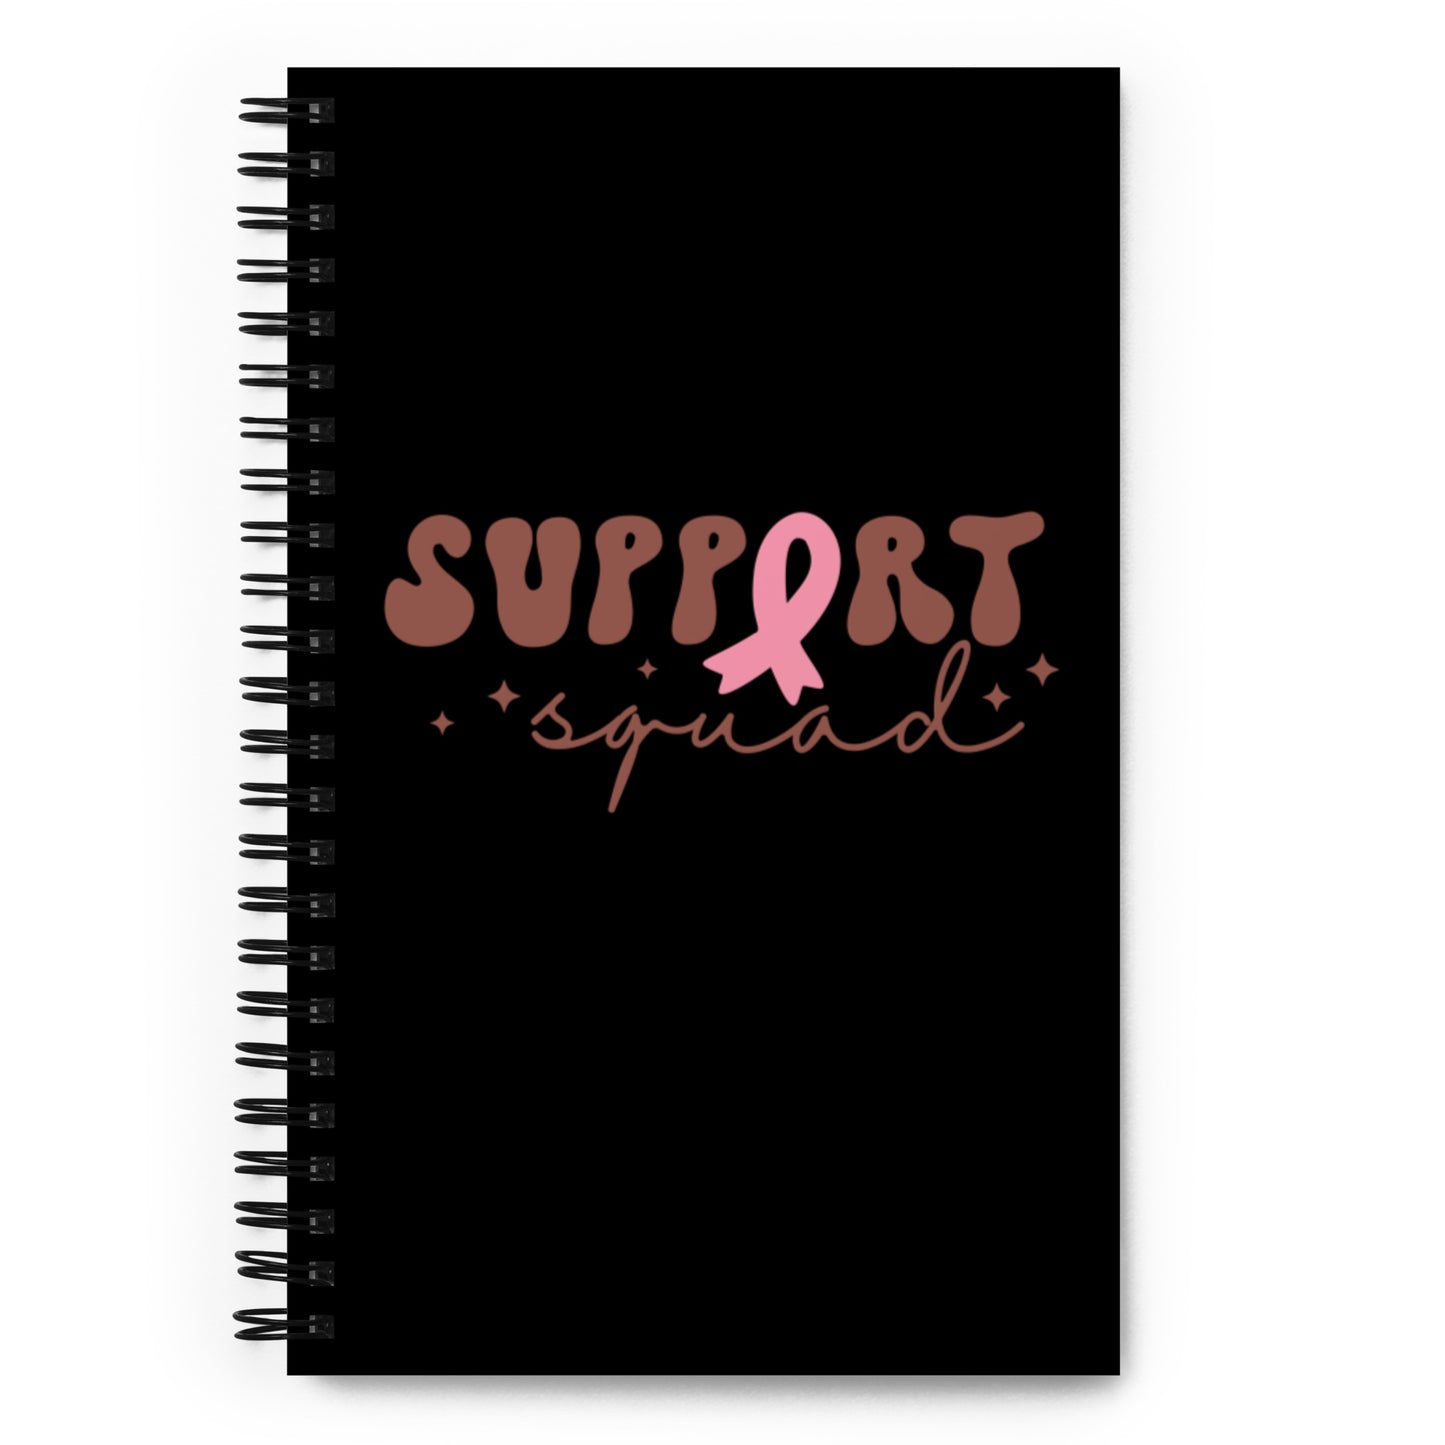 Support Squad Spiral notebook